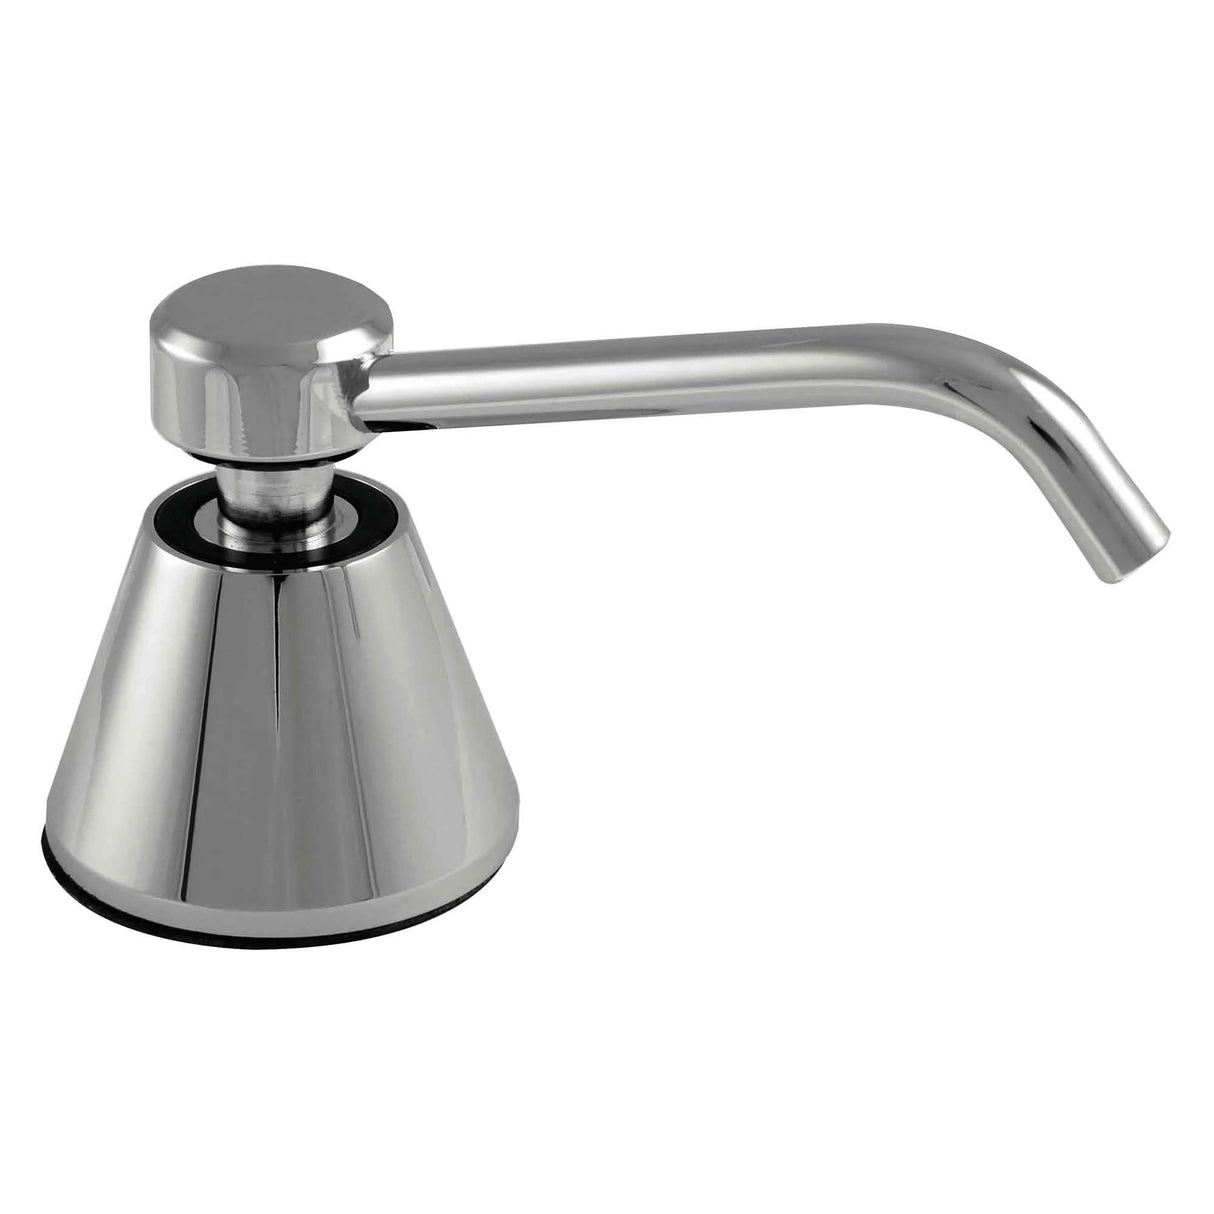 06.2020 Dolphin Counter Mounted 500ml Top Fill Chrome Plated Brass Soap Dispenser